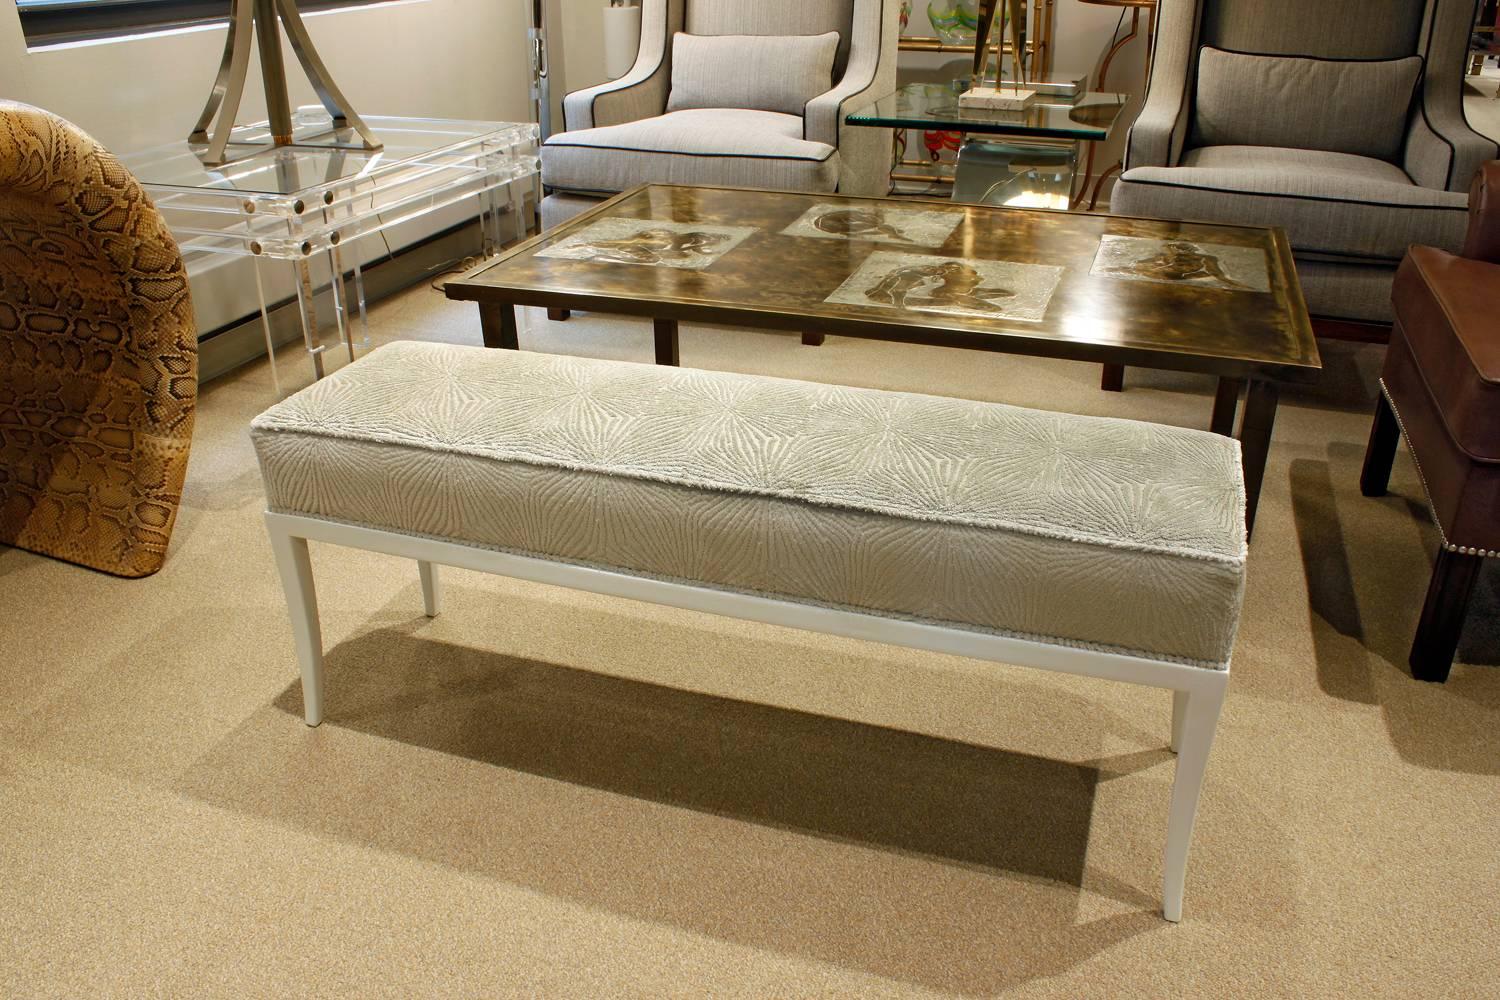 Hand-Crafted Tommi Parzinger Graceful Bench with White Lacquer Base, 1950s